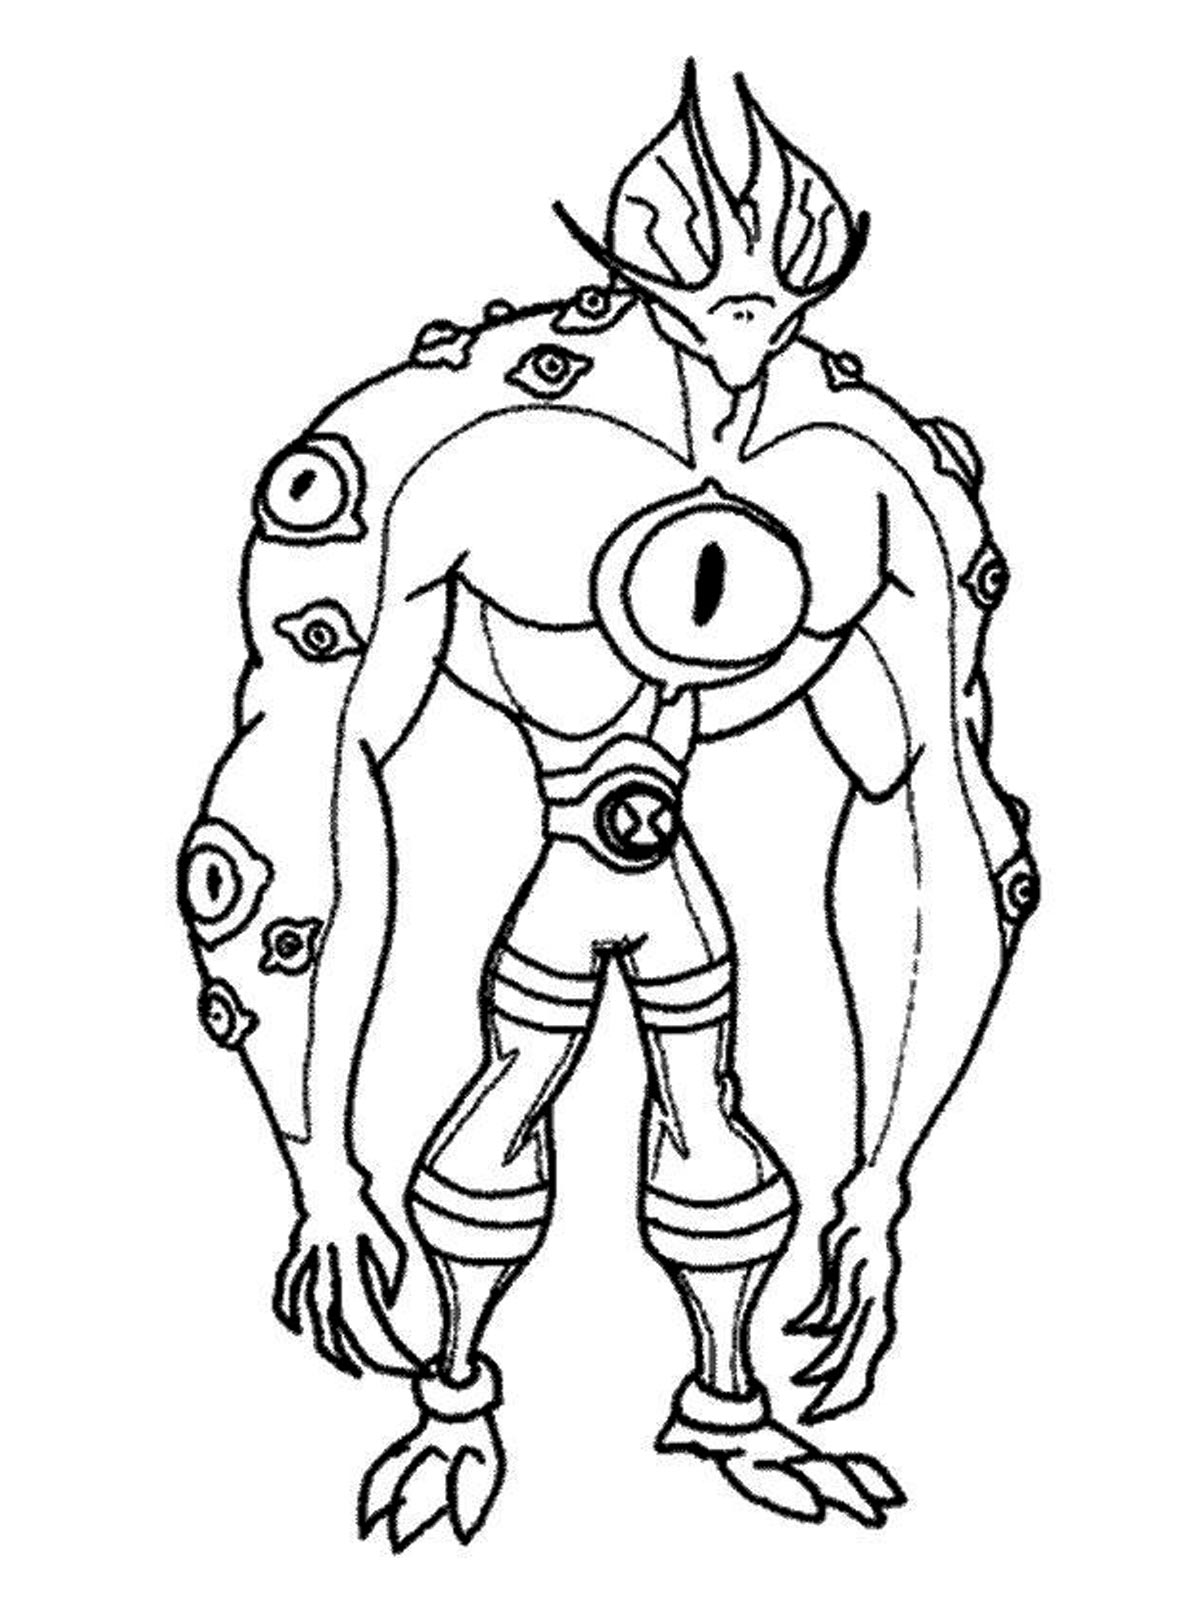 Ben 10 Ultimate Alien Colouring Sheets - High Quality Coloring Pages